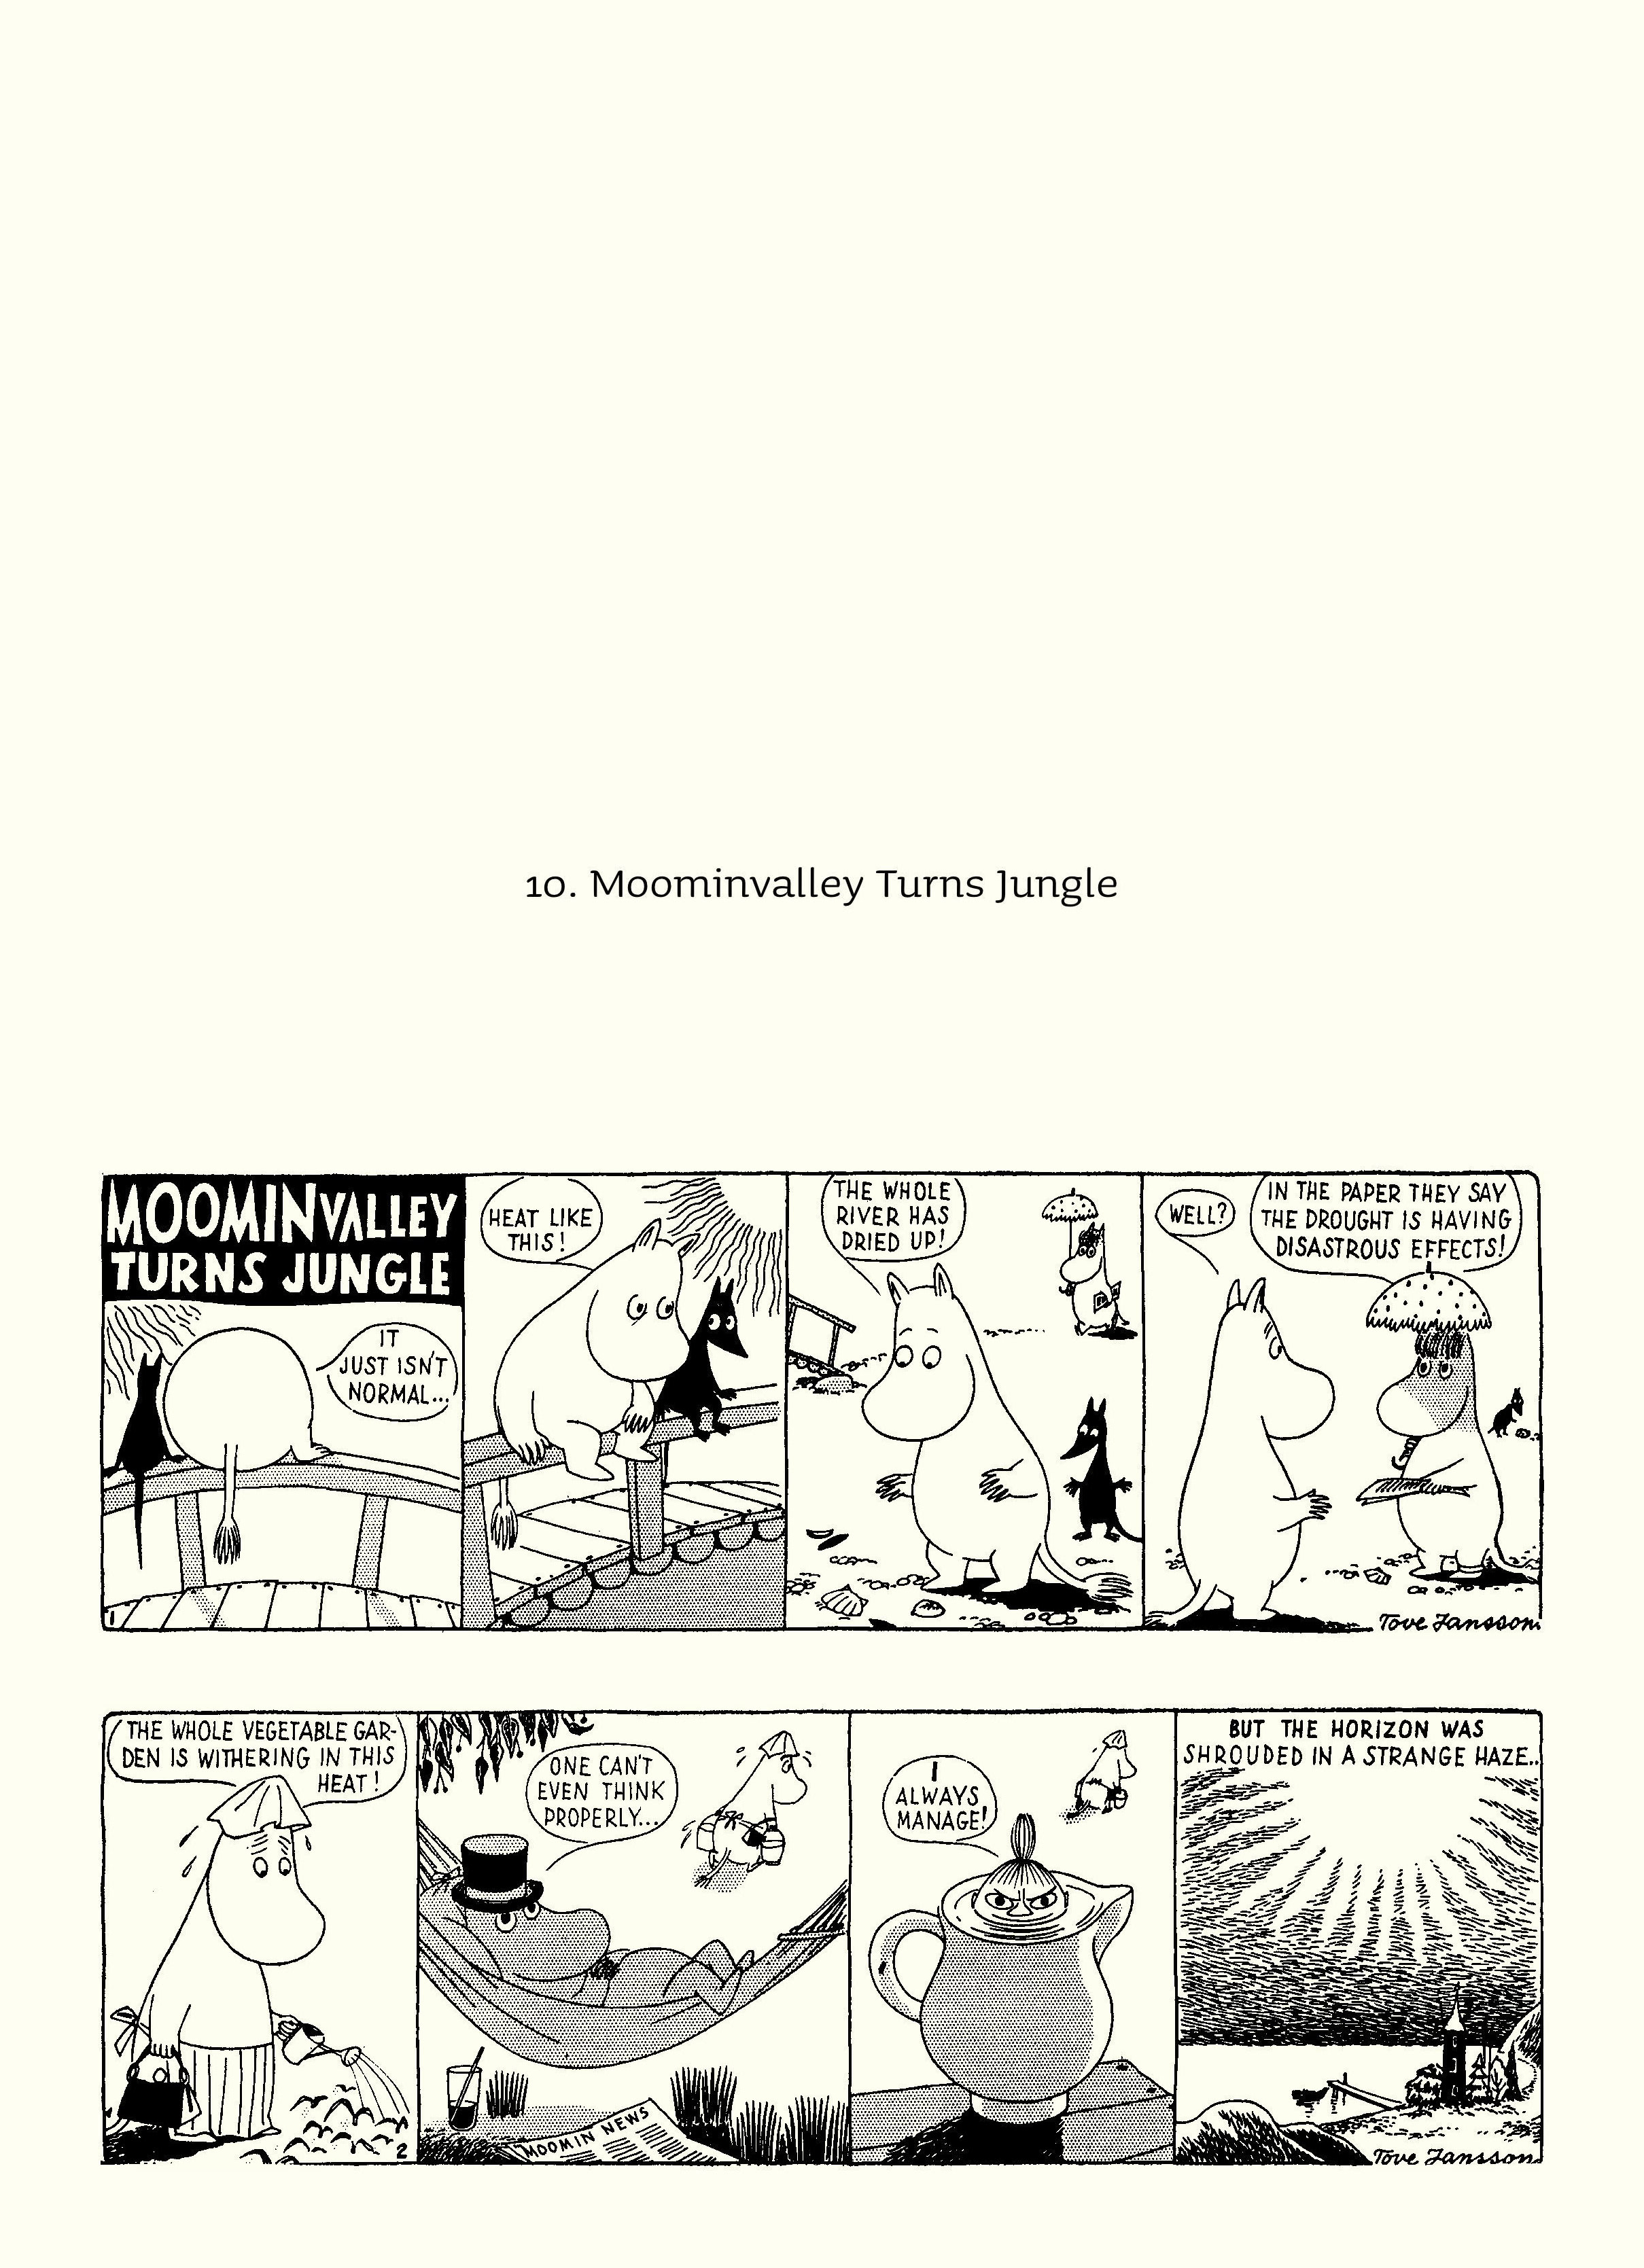 Read online Moomin: The Complete Tove Jansson Comic Strip comic -  Issue # TPB 3 - 20